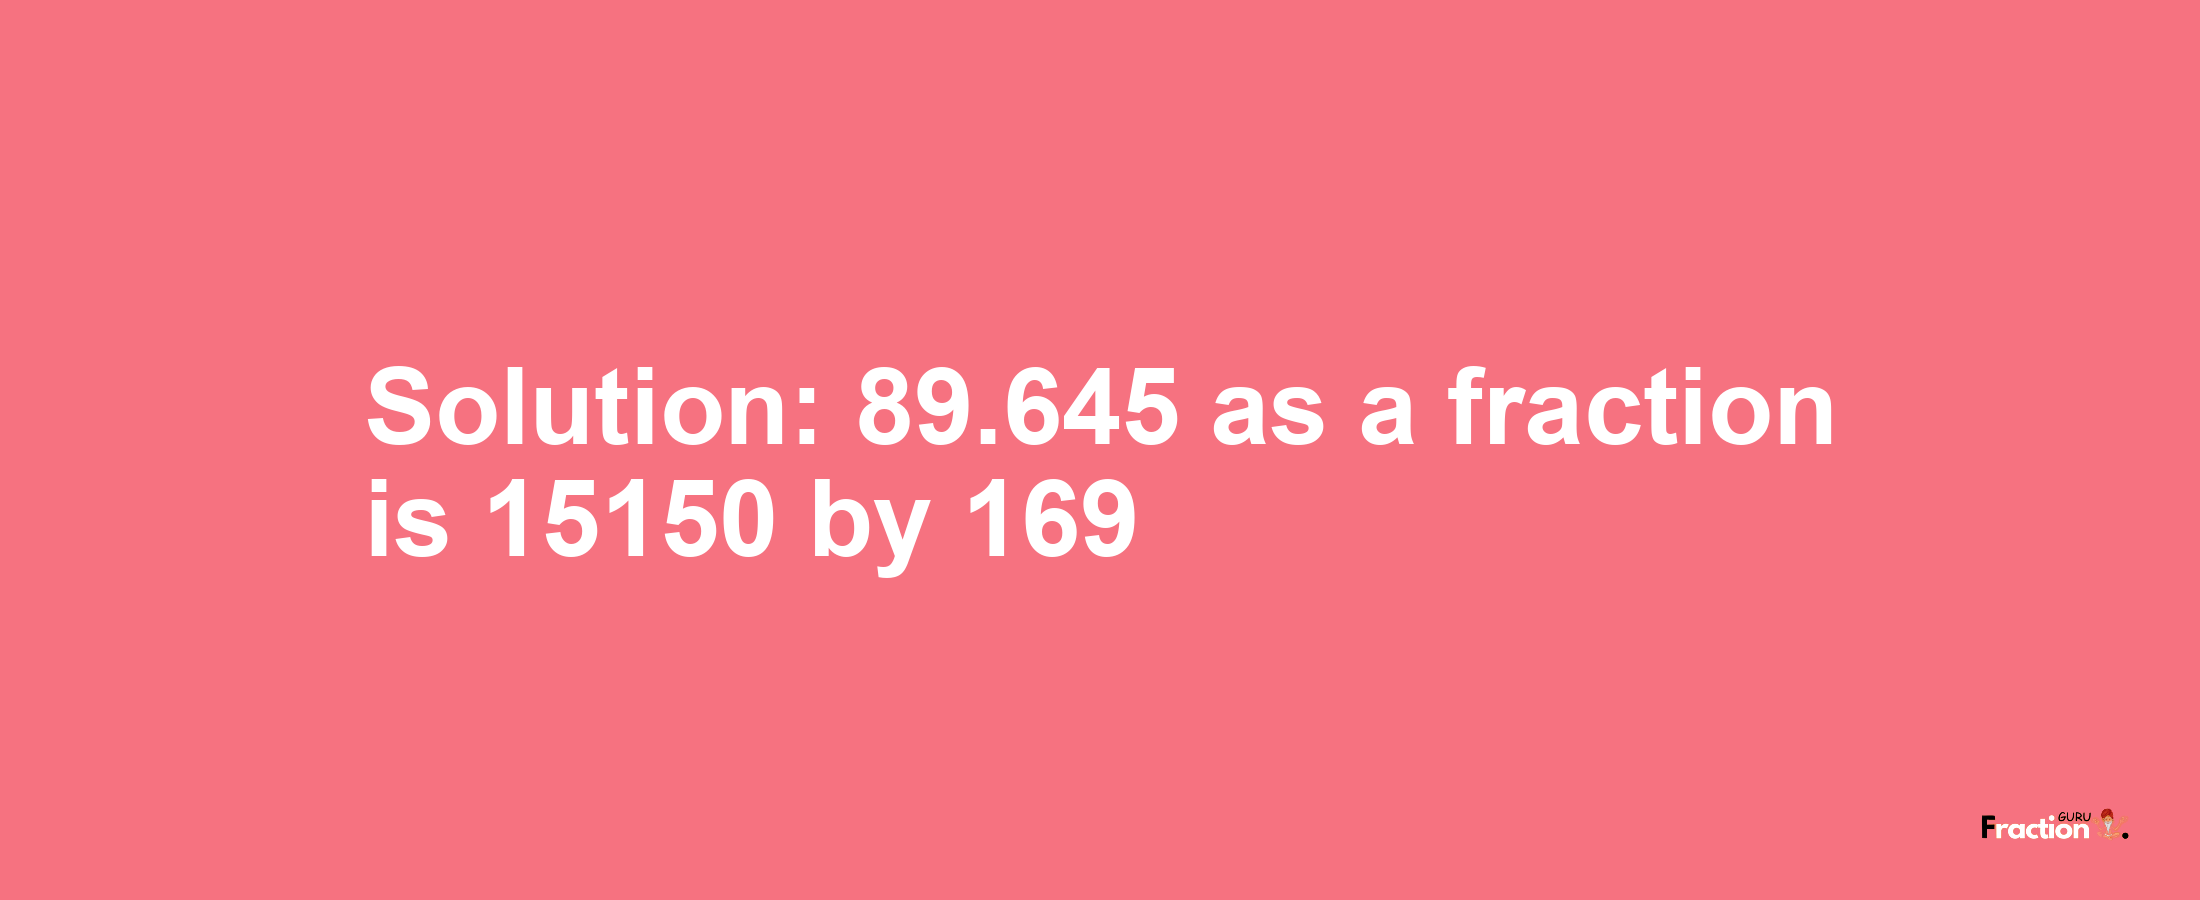 Solution:89.645 as a fraction is 15150/169